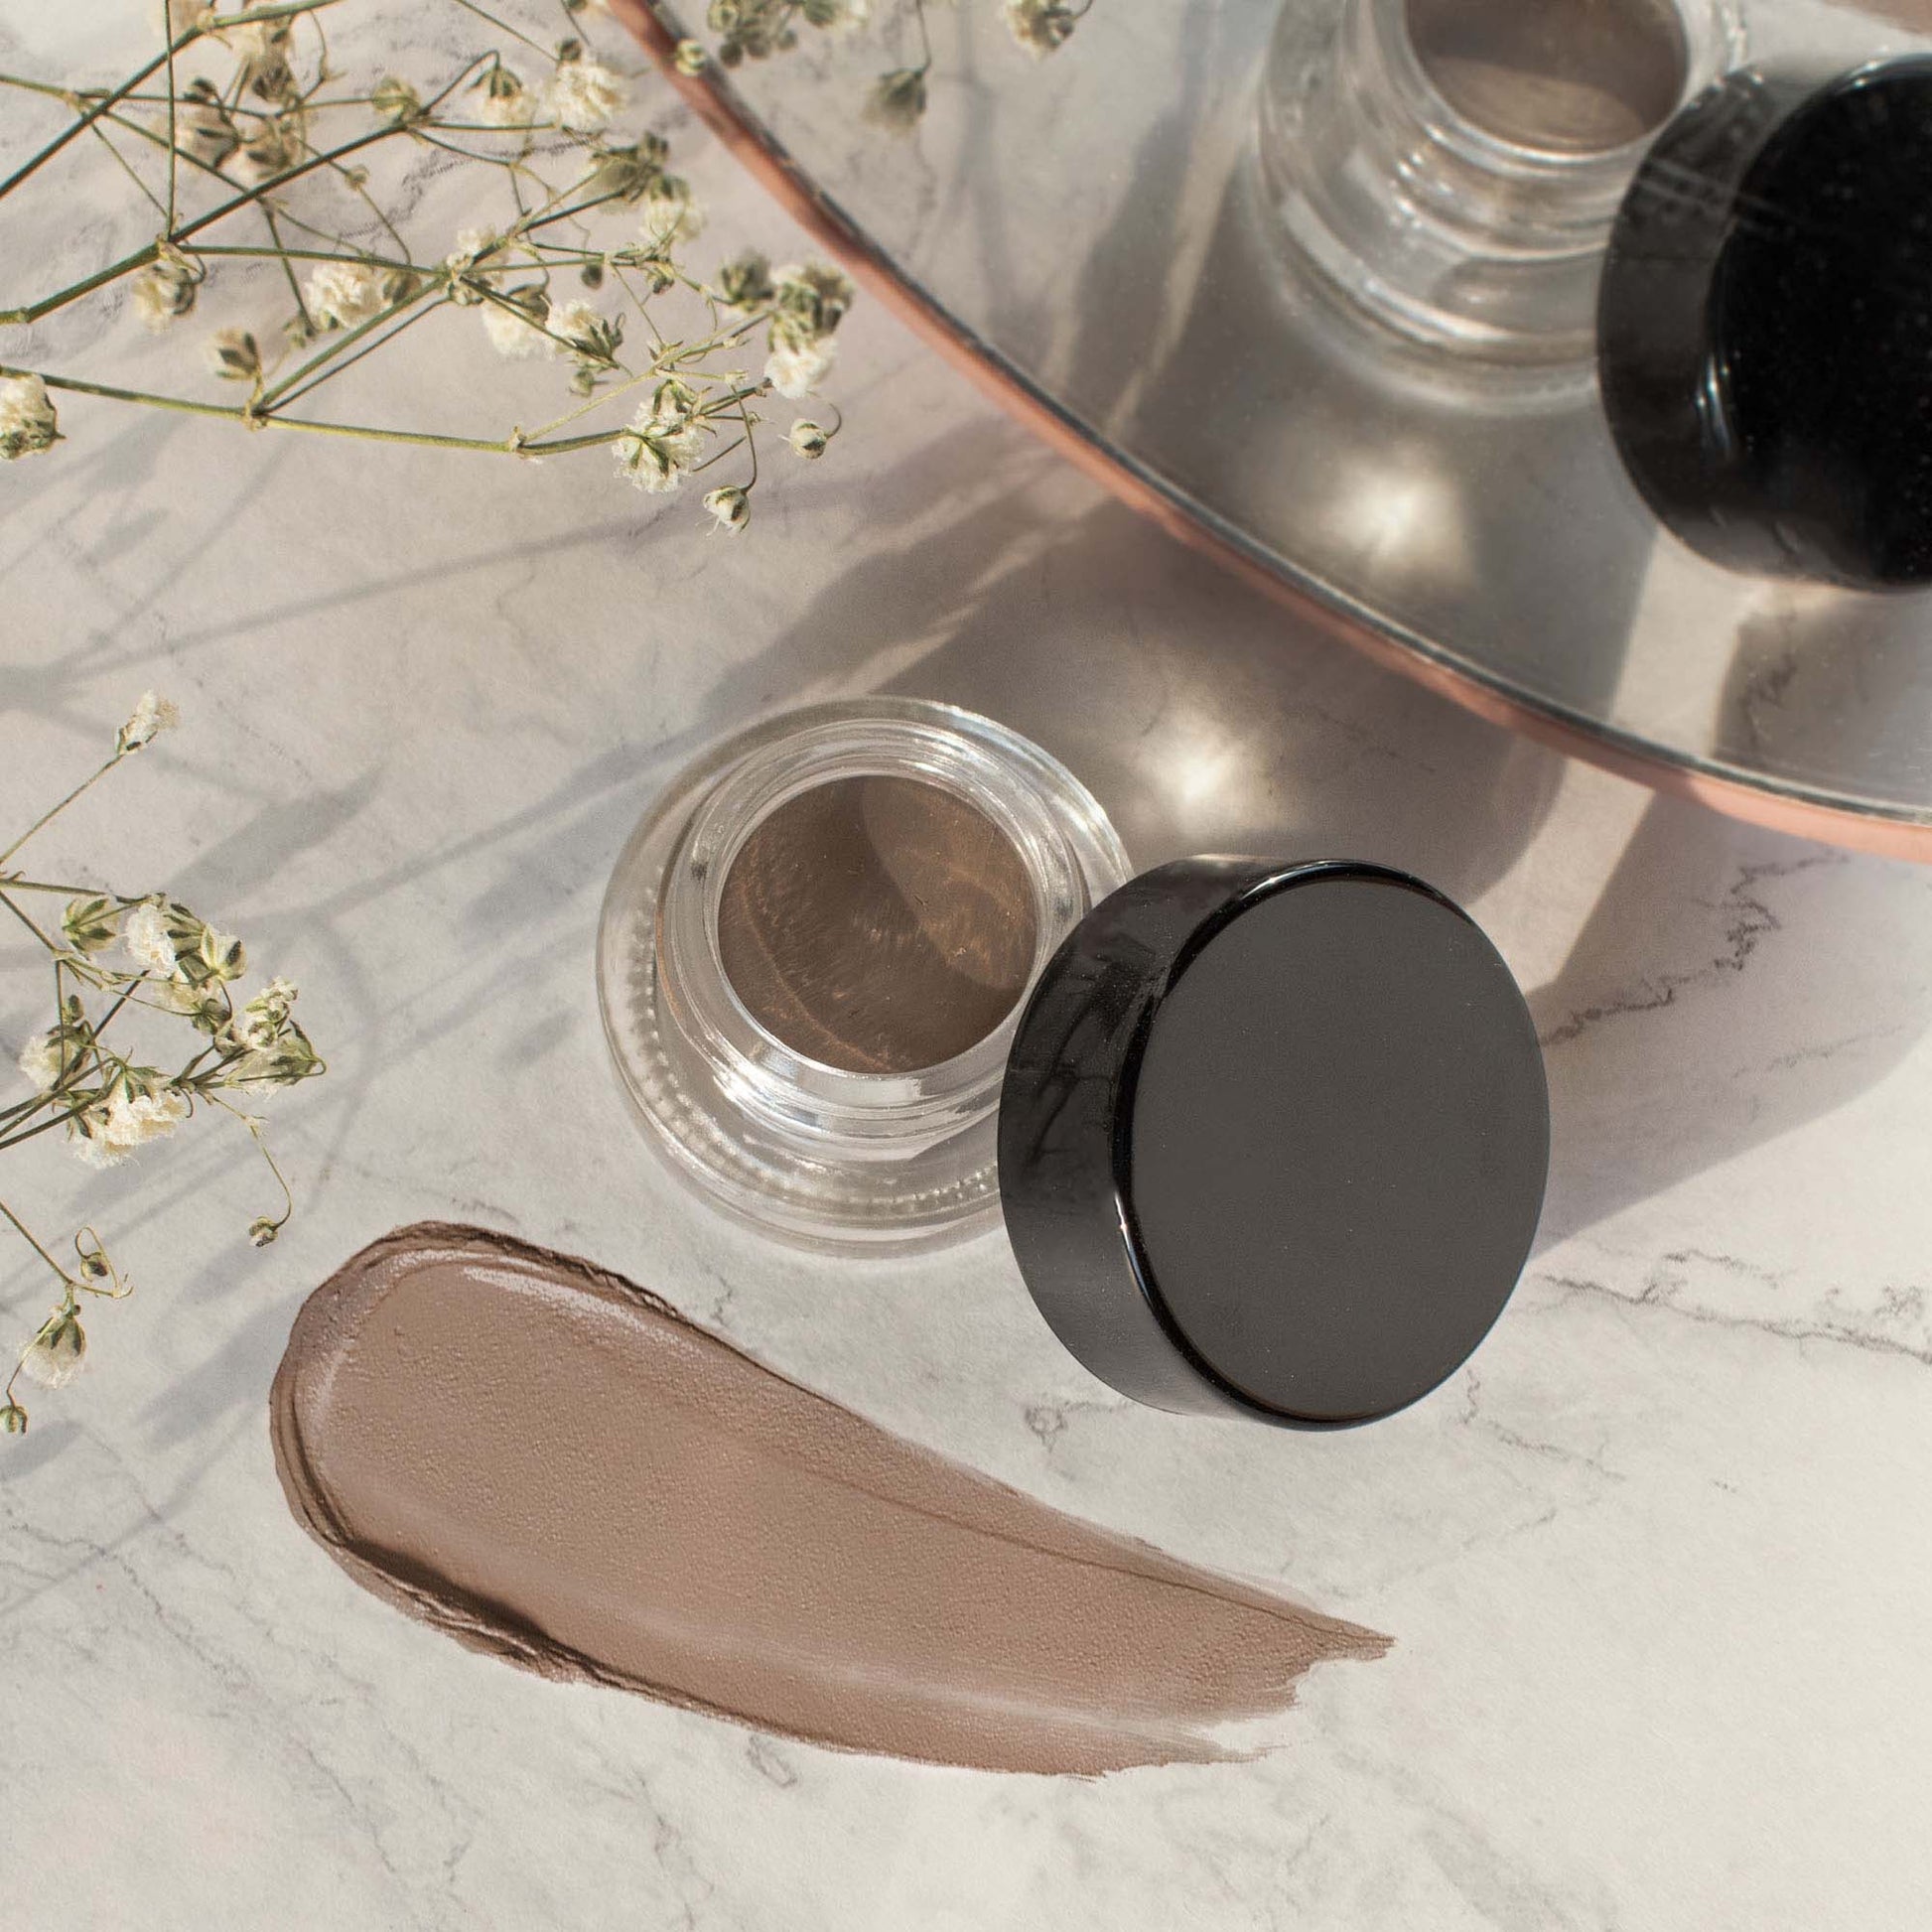 Improve your brow routine with Cruisin Organics' Choco-Latte Brow Pomade. This pomade is both vegan and cruelty-free, providing fullness and definition for both thin and thick brows. Free from parabens and fragrance, it also tames and shapes brows for a polished look.